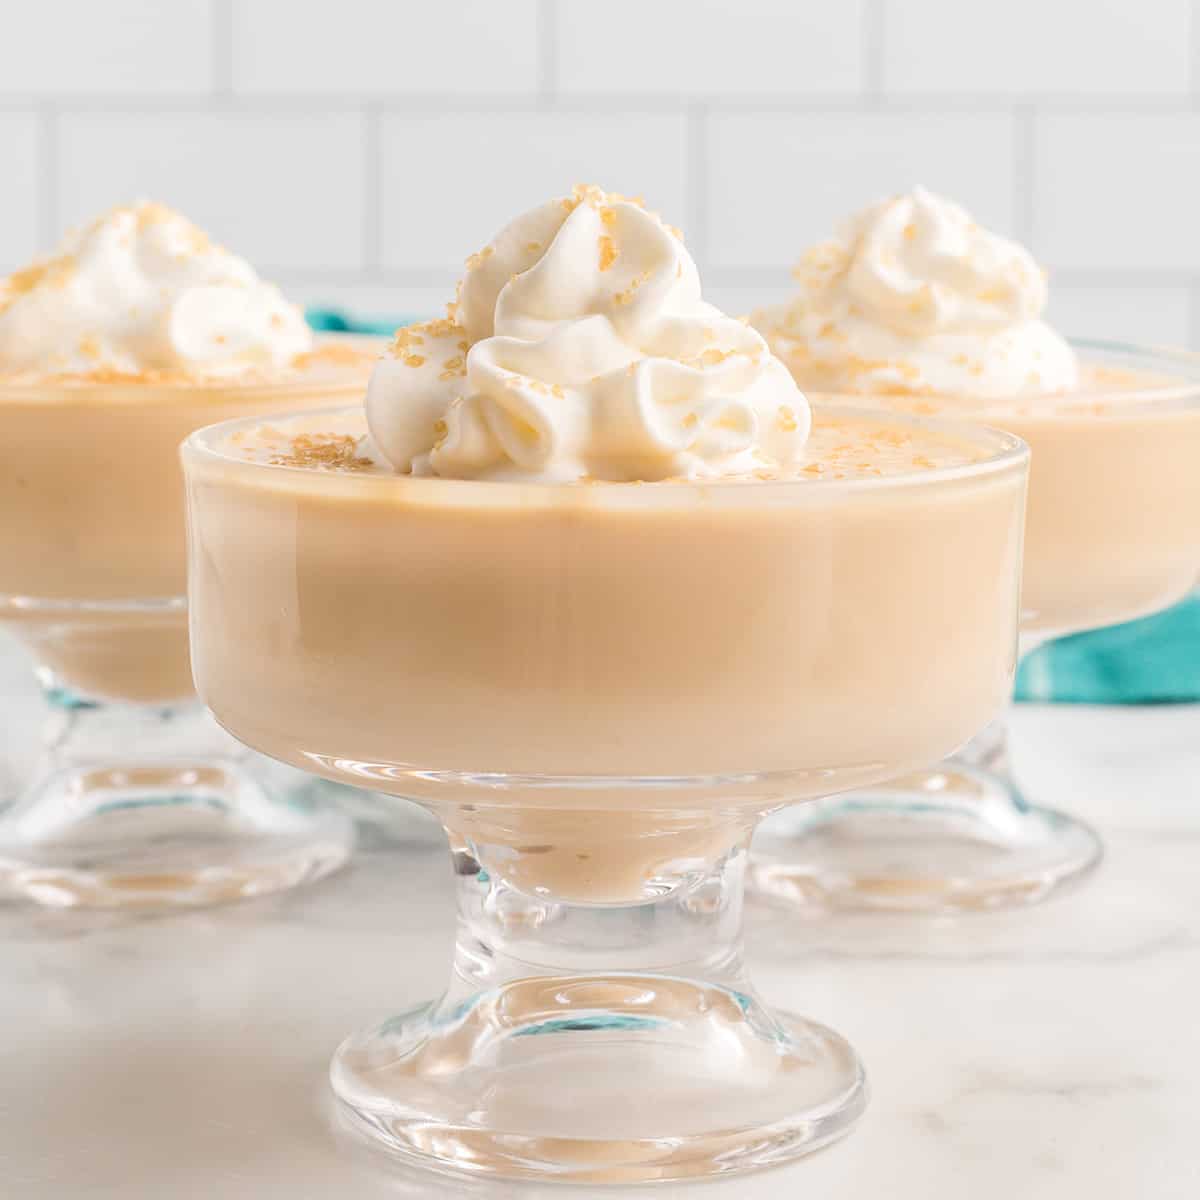 Three dishes filled with butterscotch pudding topped with whipped cream and turbinado sugar.